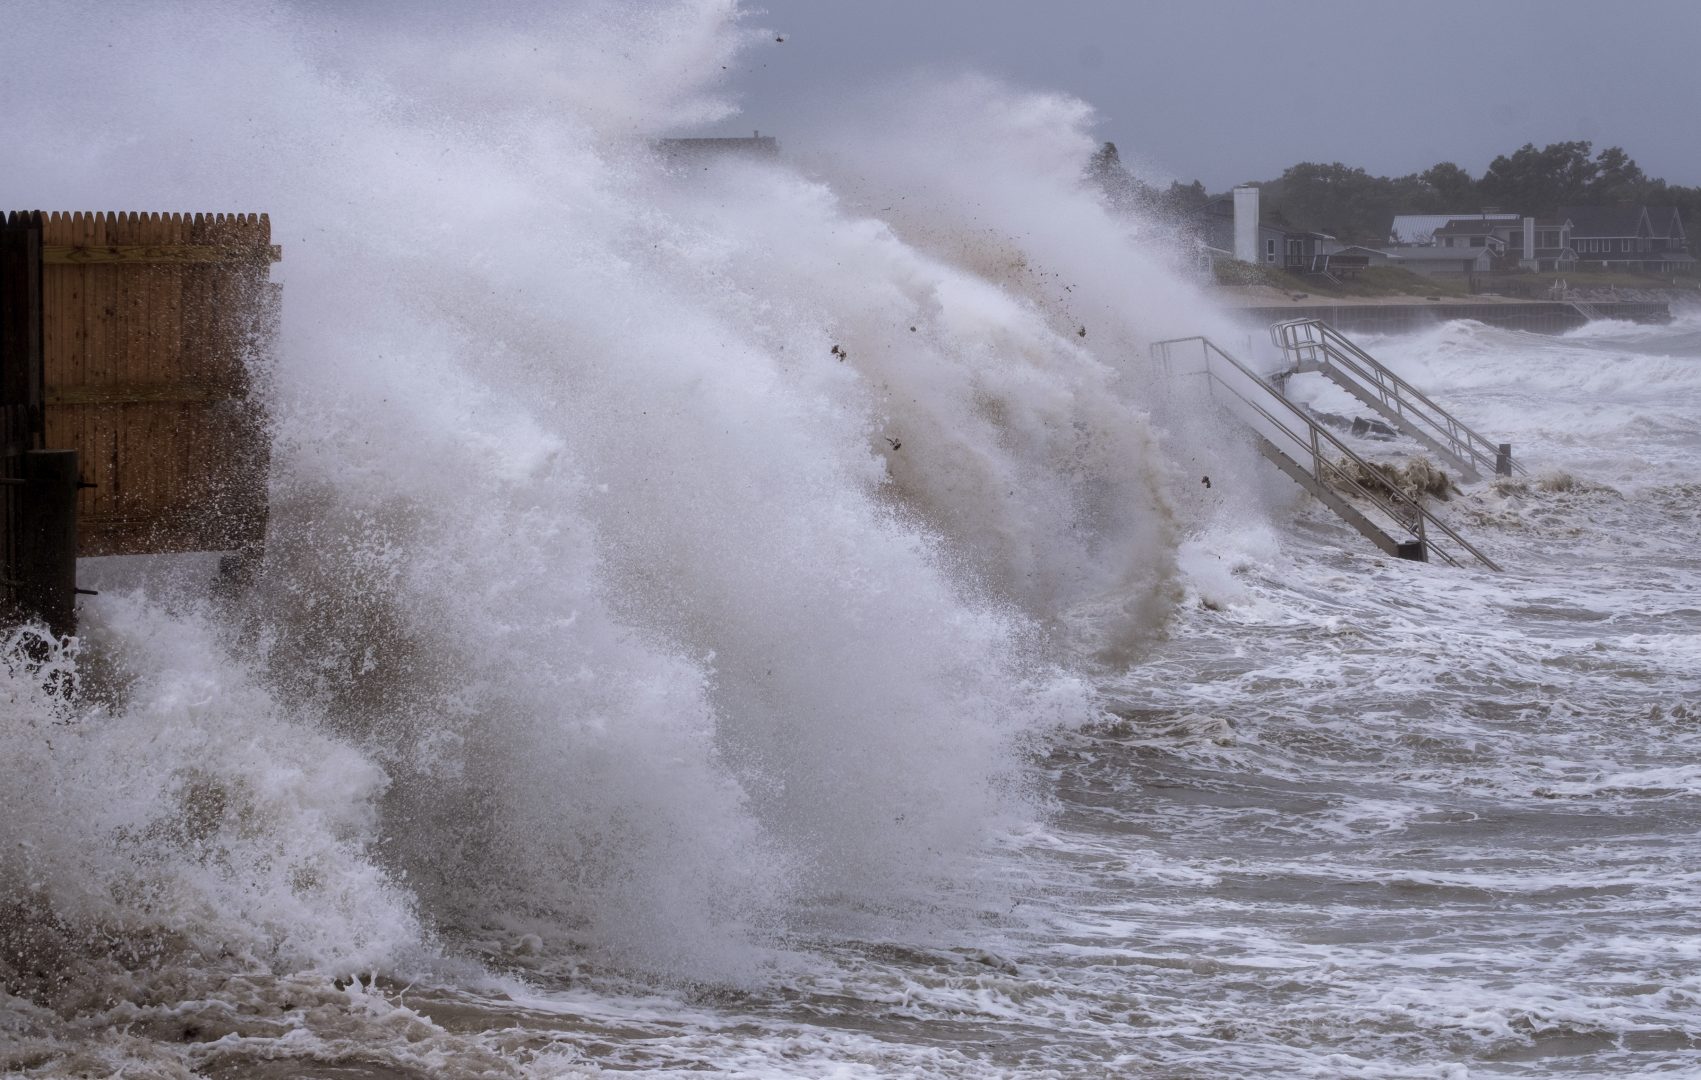 Waves pound the seawall in Montauk, N.Y., Sunday, Aug. 22, 2021, as Tropical Storm Henri affects the Atlantic coast.